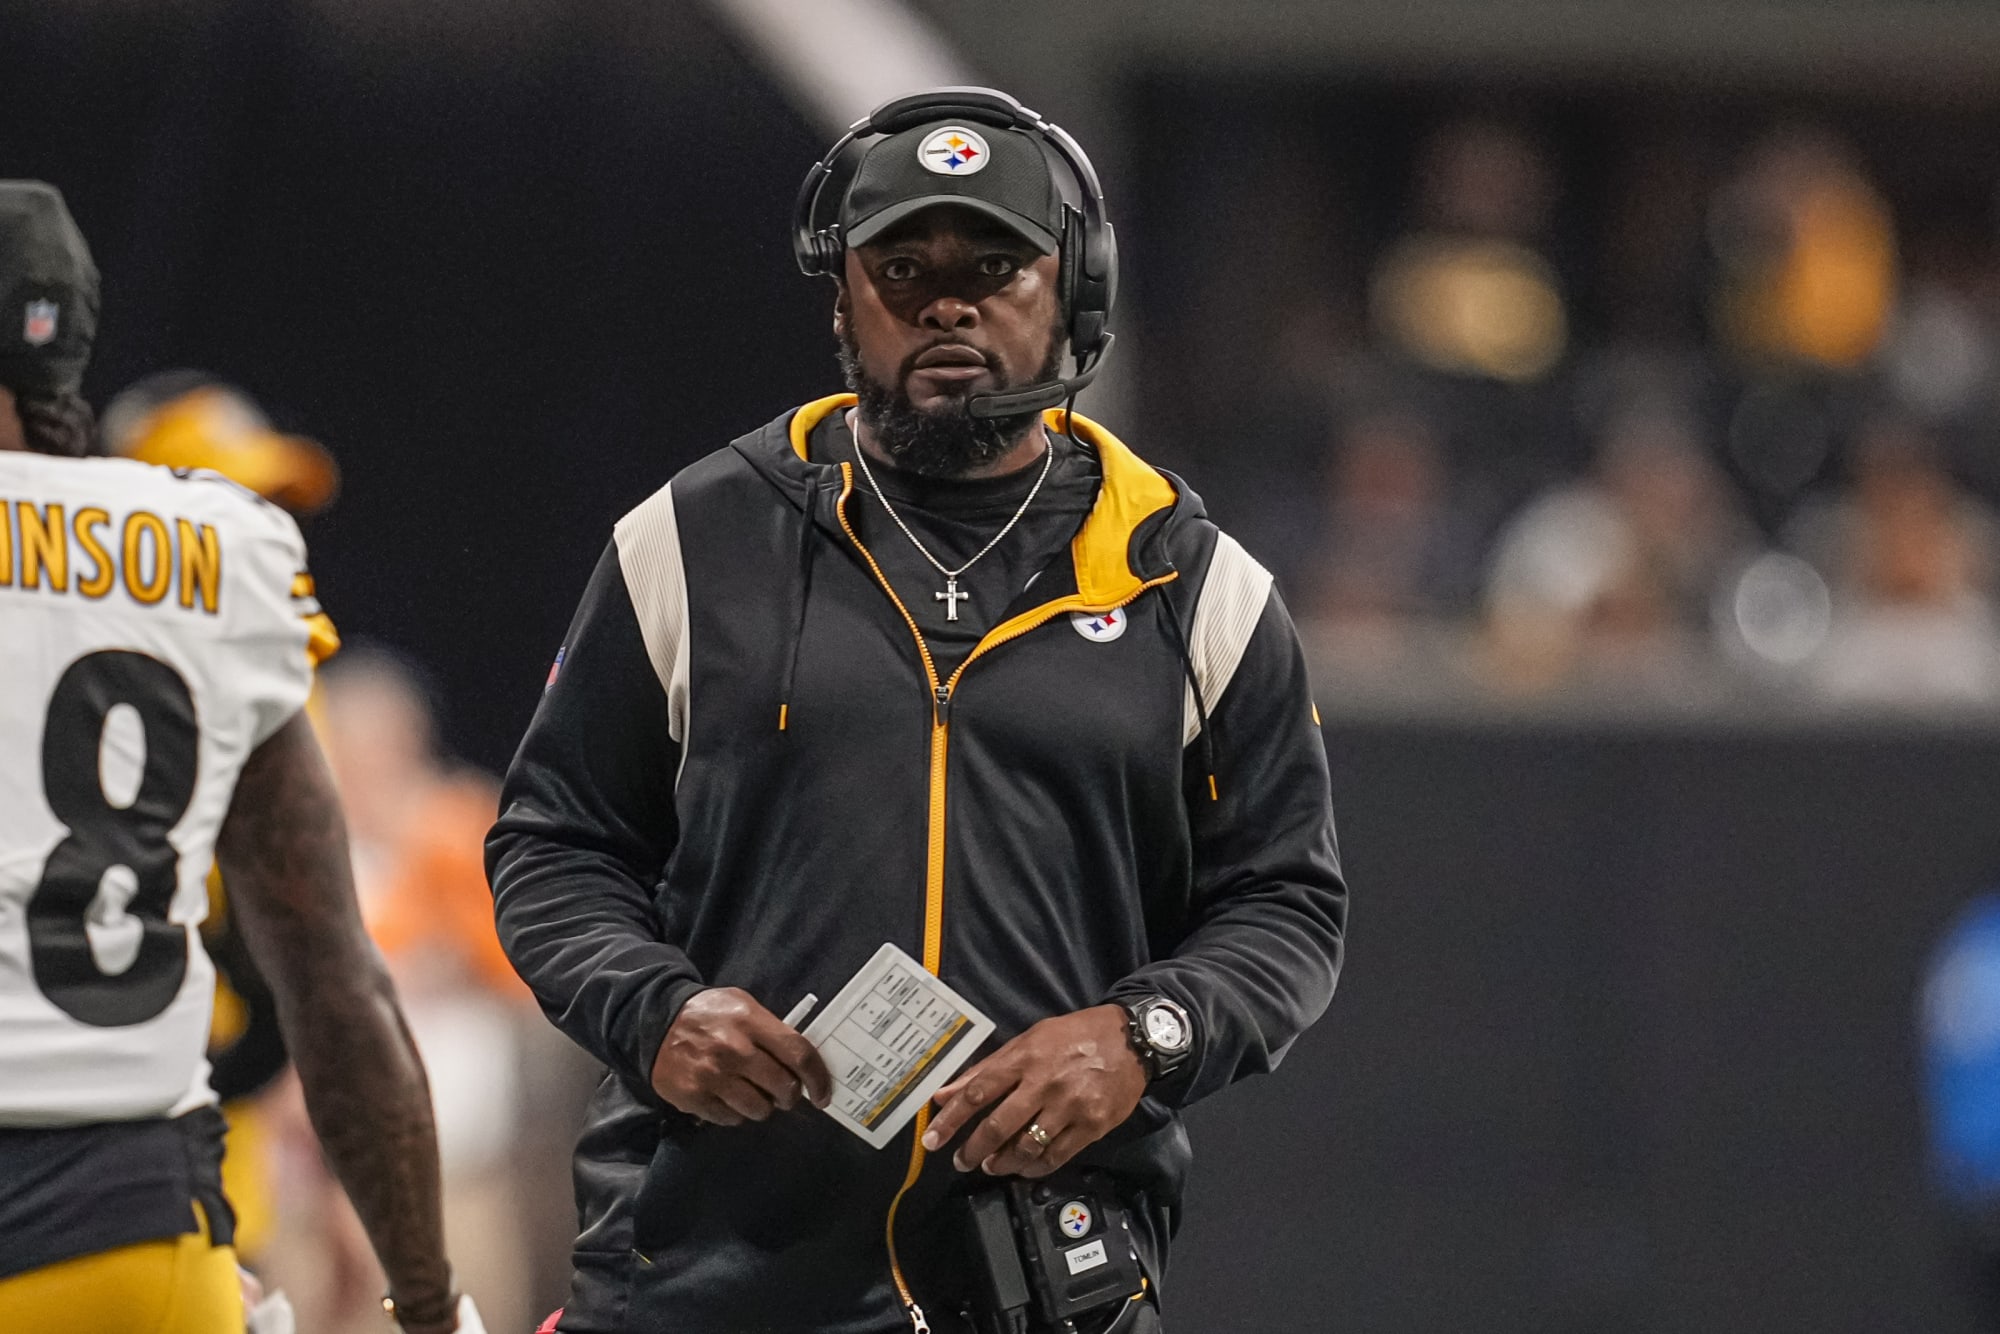 Fire Mike Tomlin? Please, Steelers stars know exactly what they’re playing for